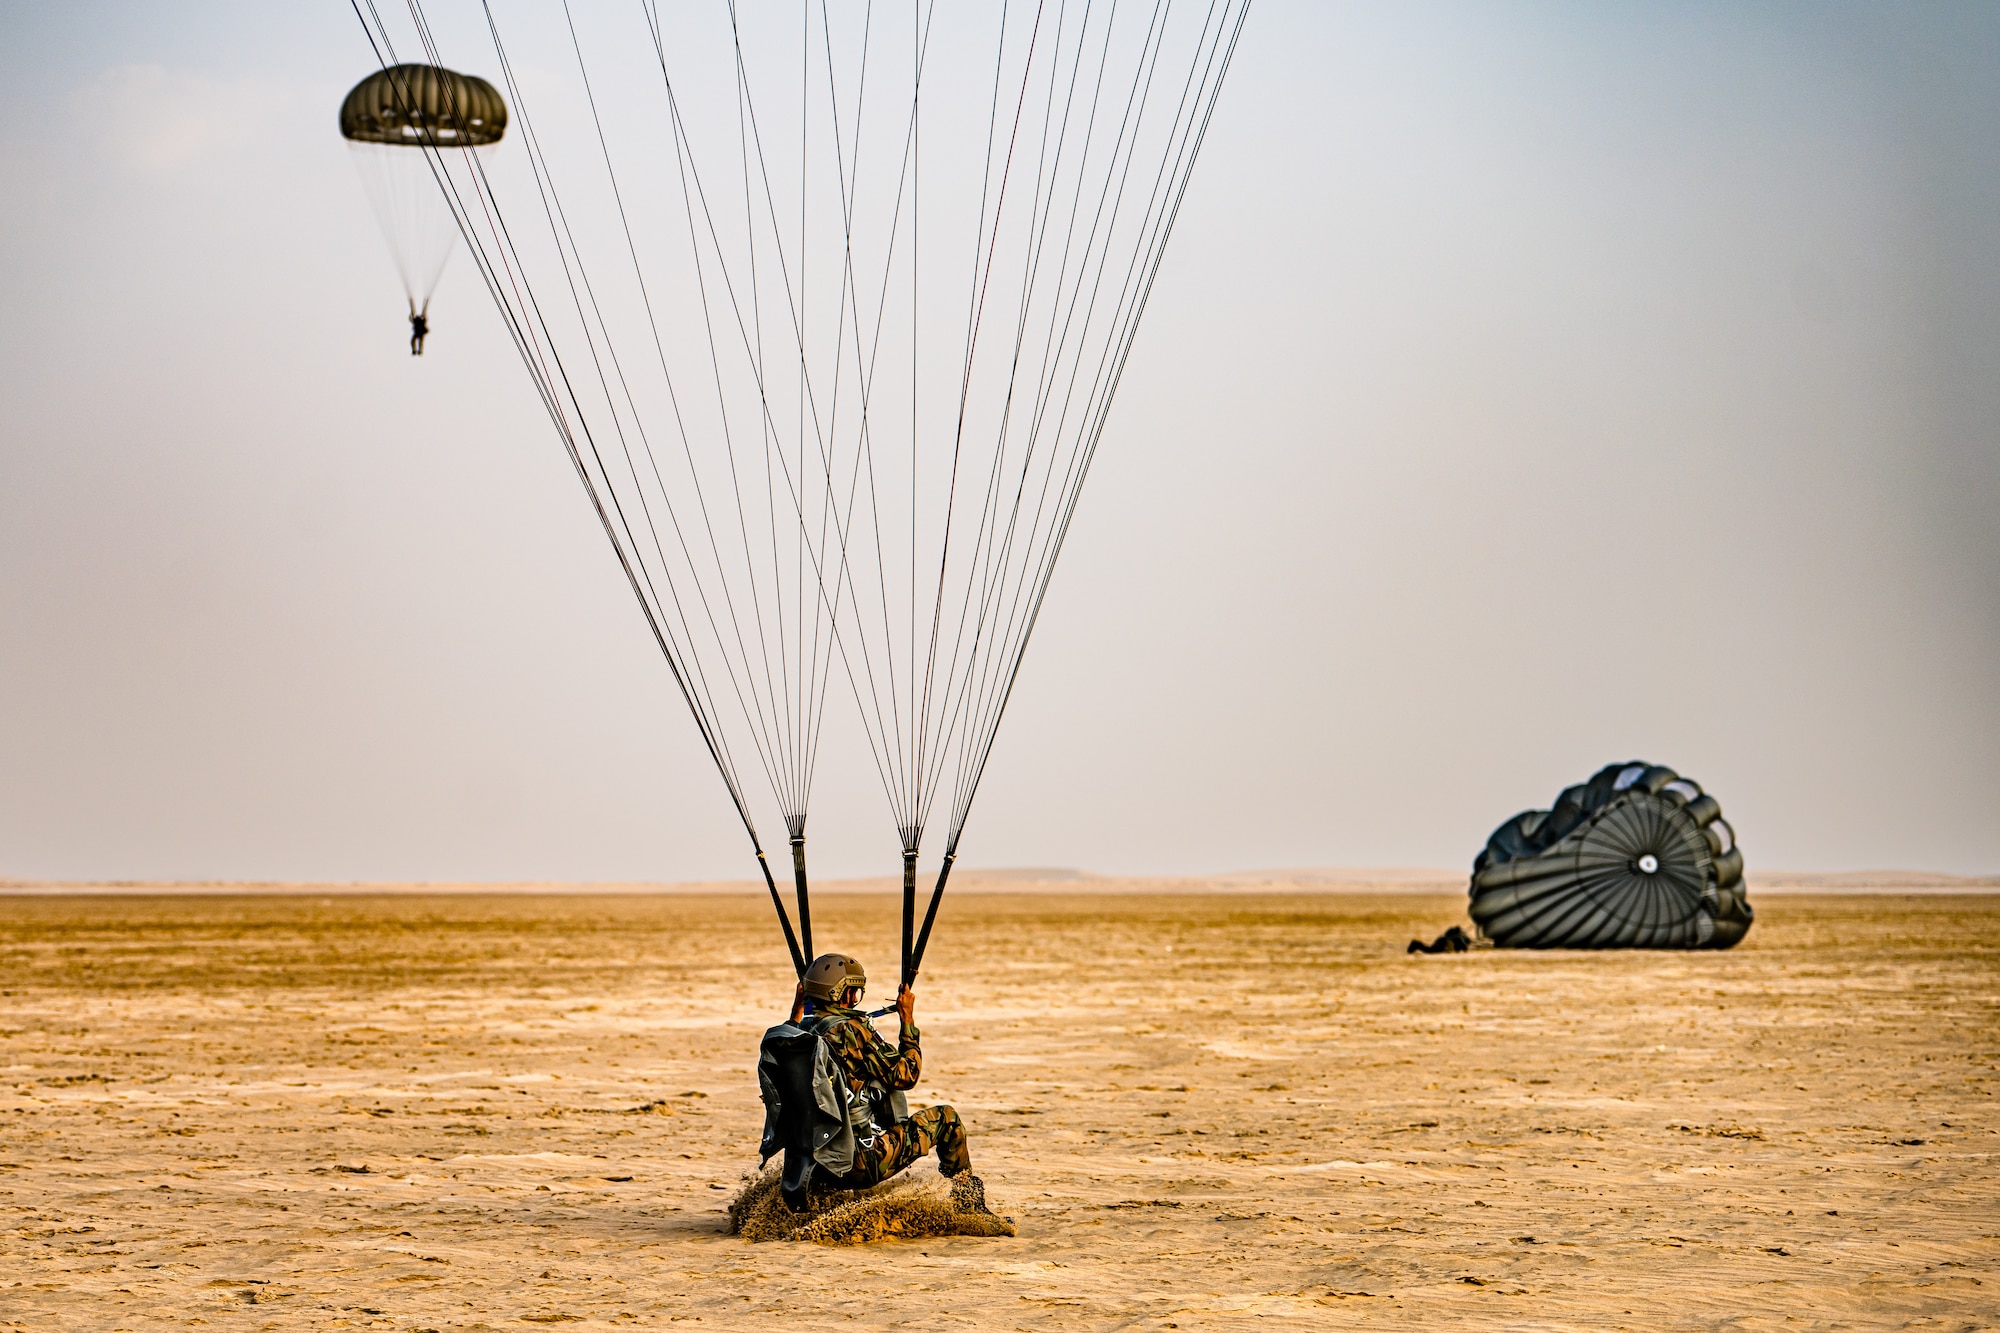 Paratrooper landing in the sand